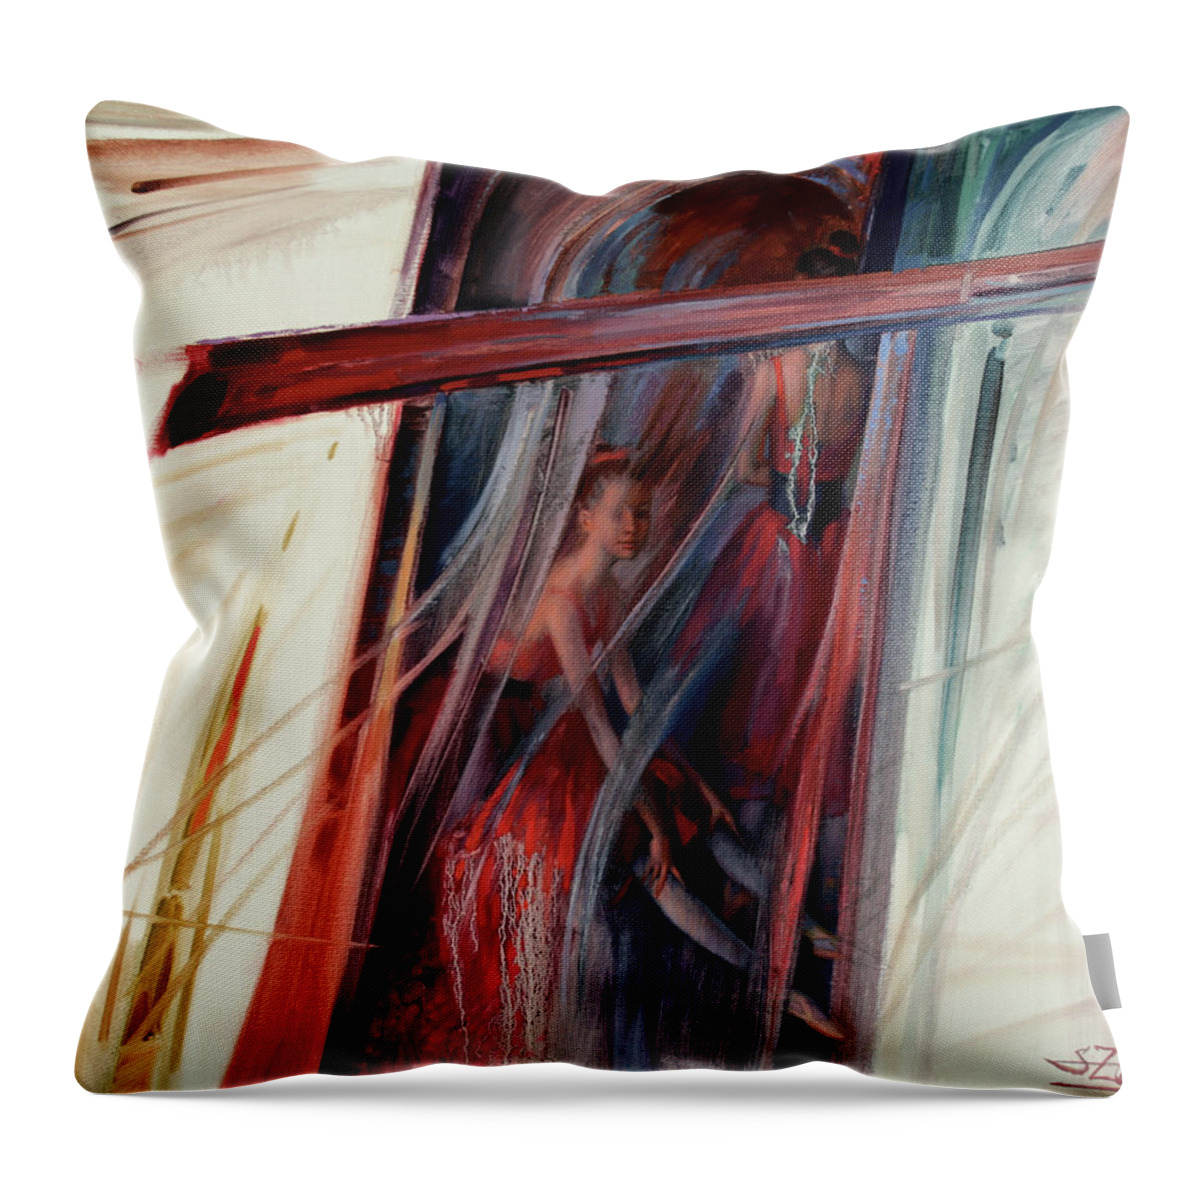 Ballet Throw Pillow featuring the painting Balle-t by Serguei Zlenko